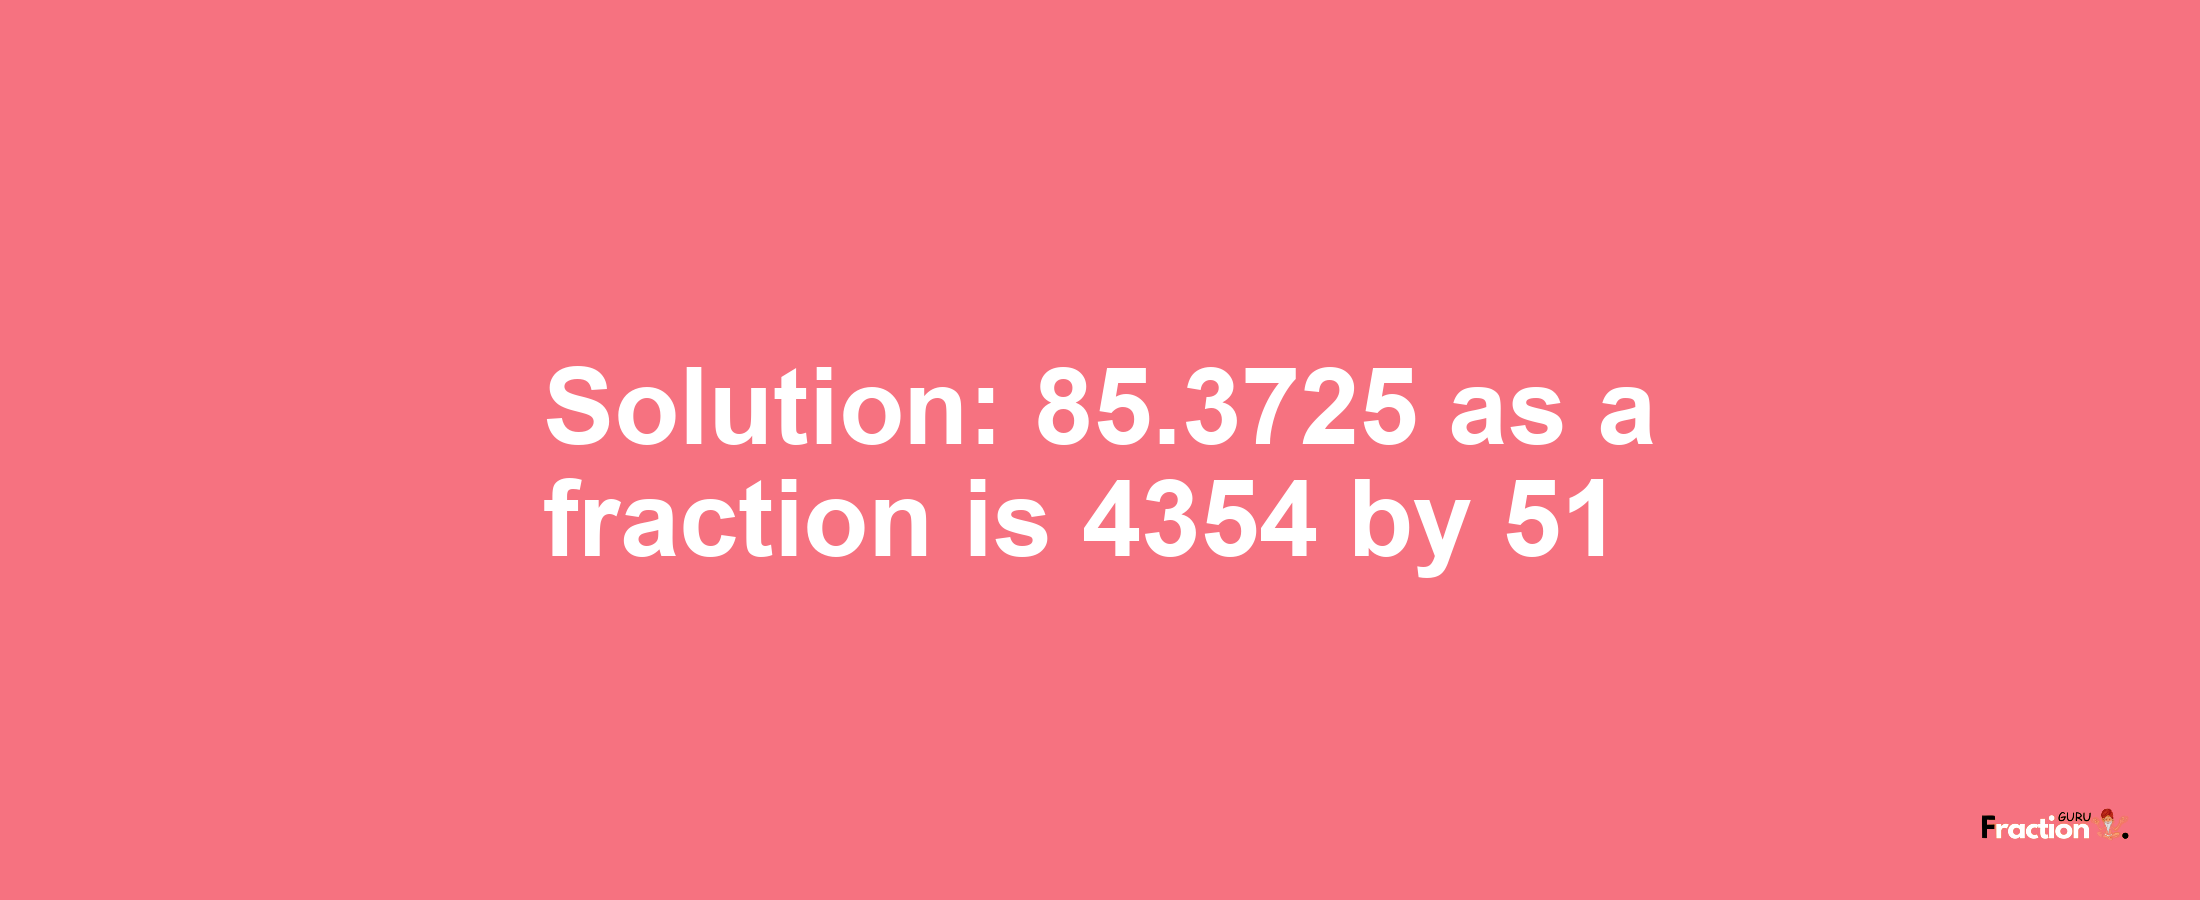 Solution:85.3725 as a fraction is 4354/51